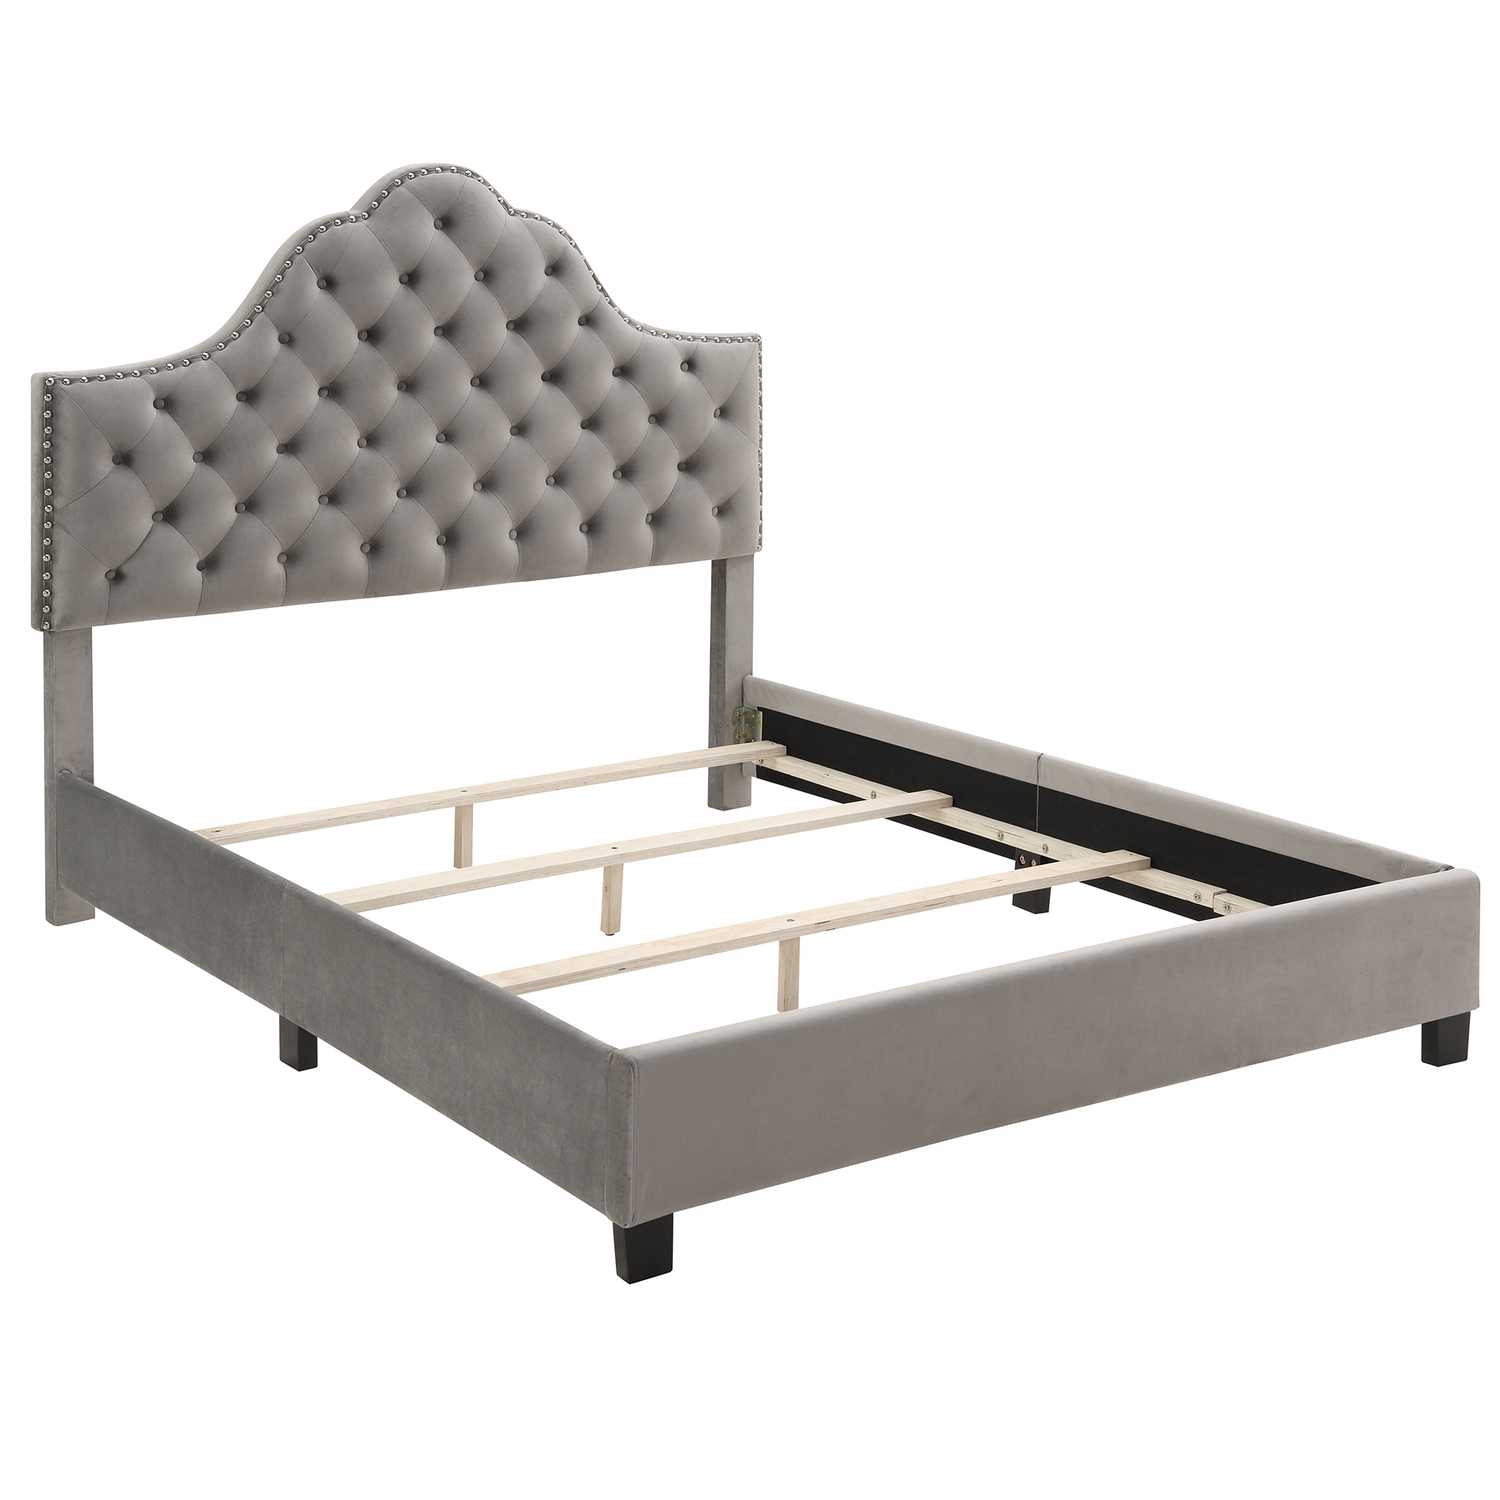 Nspire 101-292Q-GY 60 in. Greta Bed in Grey - Queen Size - image 4 of 6